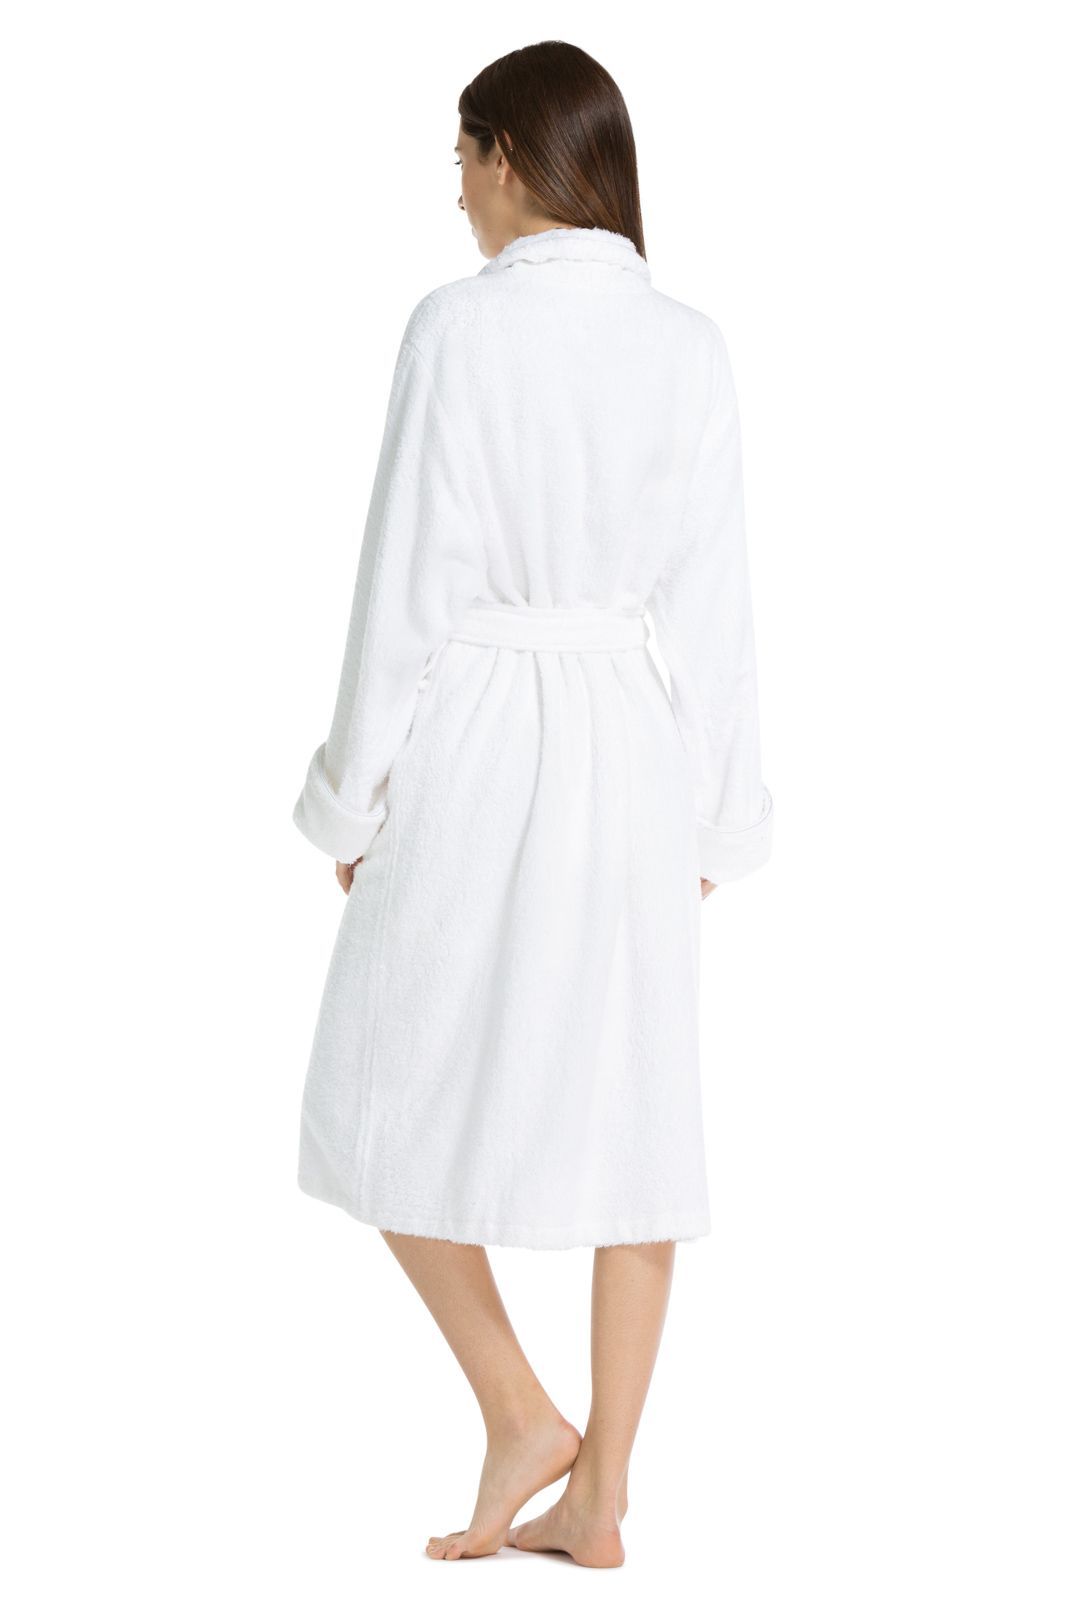 Download Women's Robes | Full Length Terry Cloth Spa Robe | Fishers ...